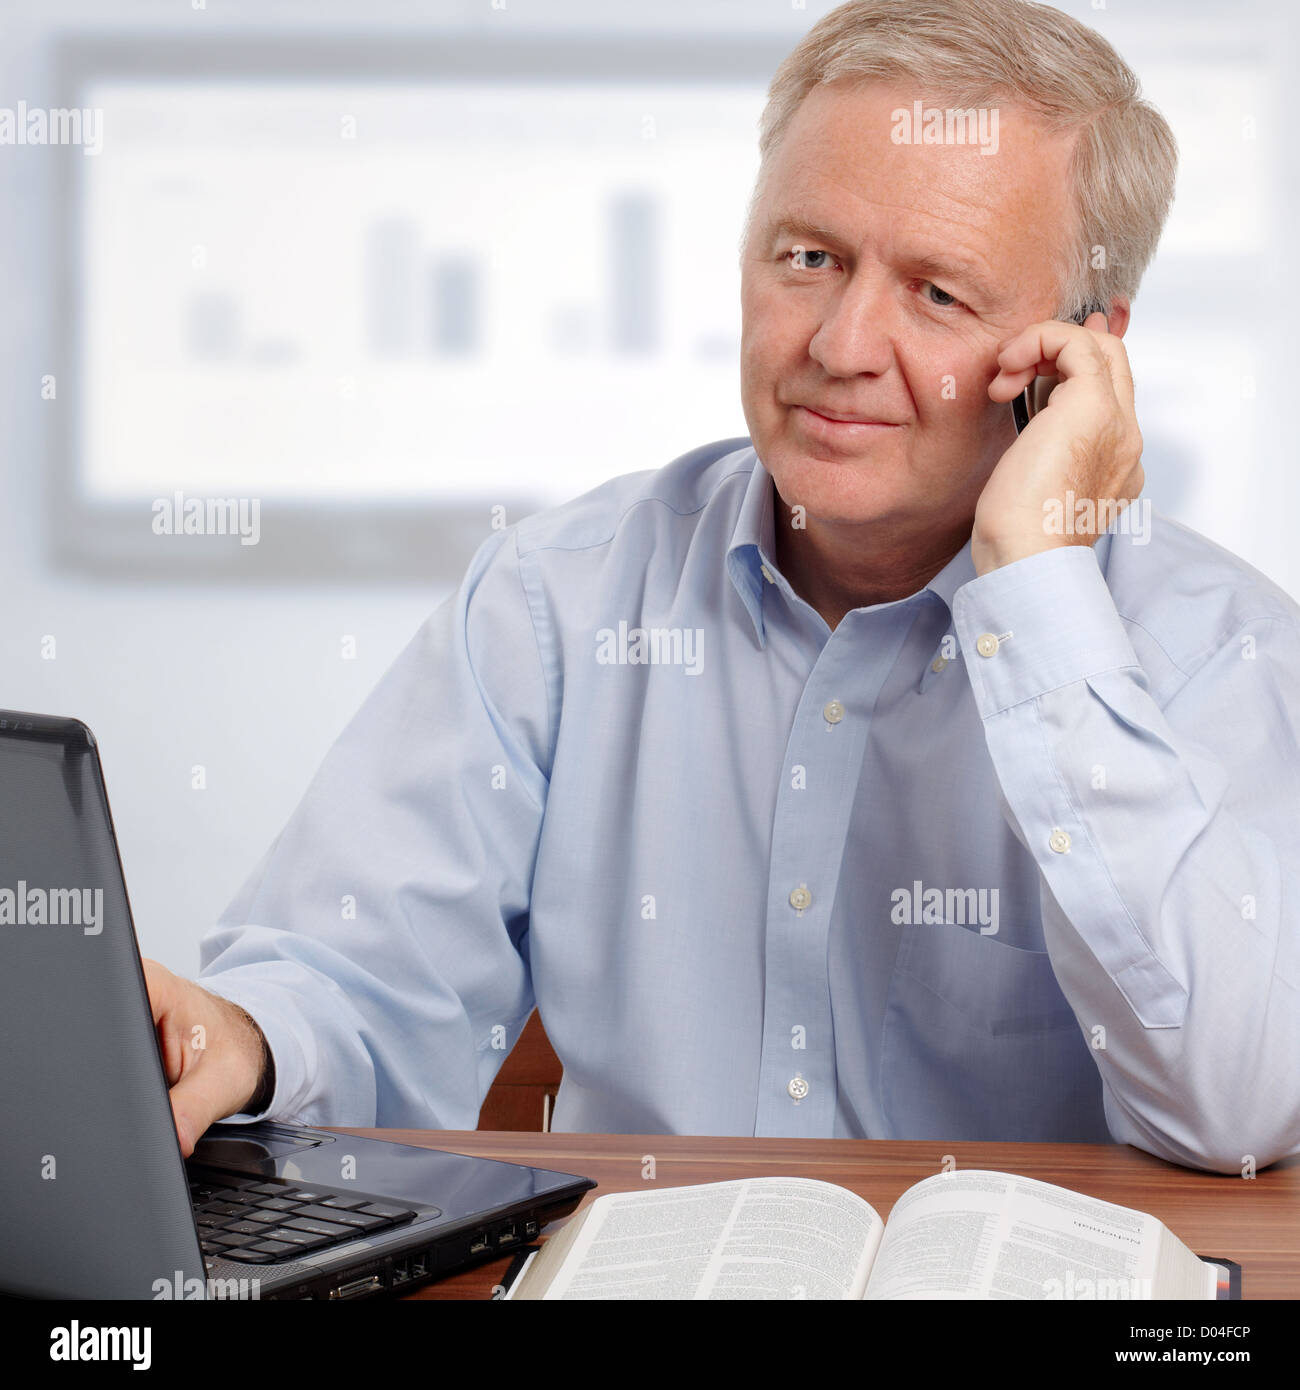 Man talking on phone and smiling in front of the laptop and the Bible Stock Photo